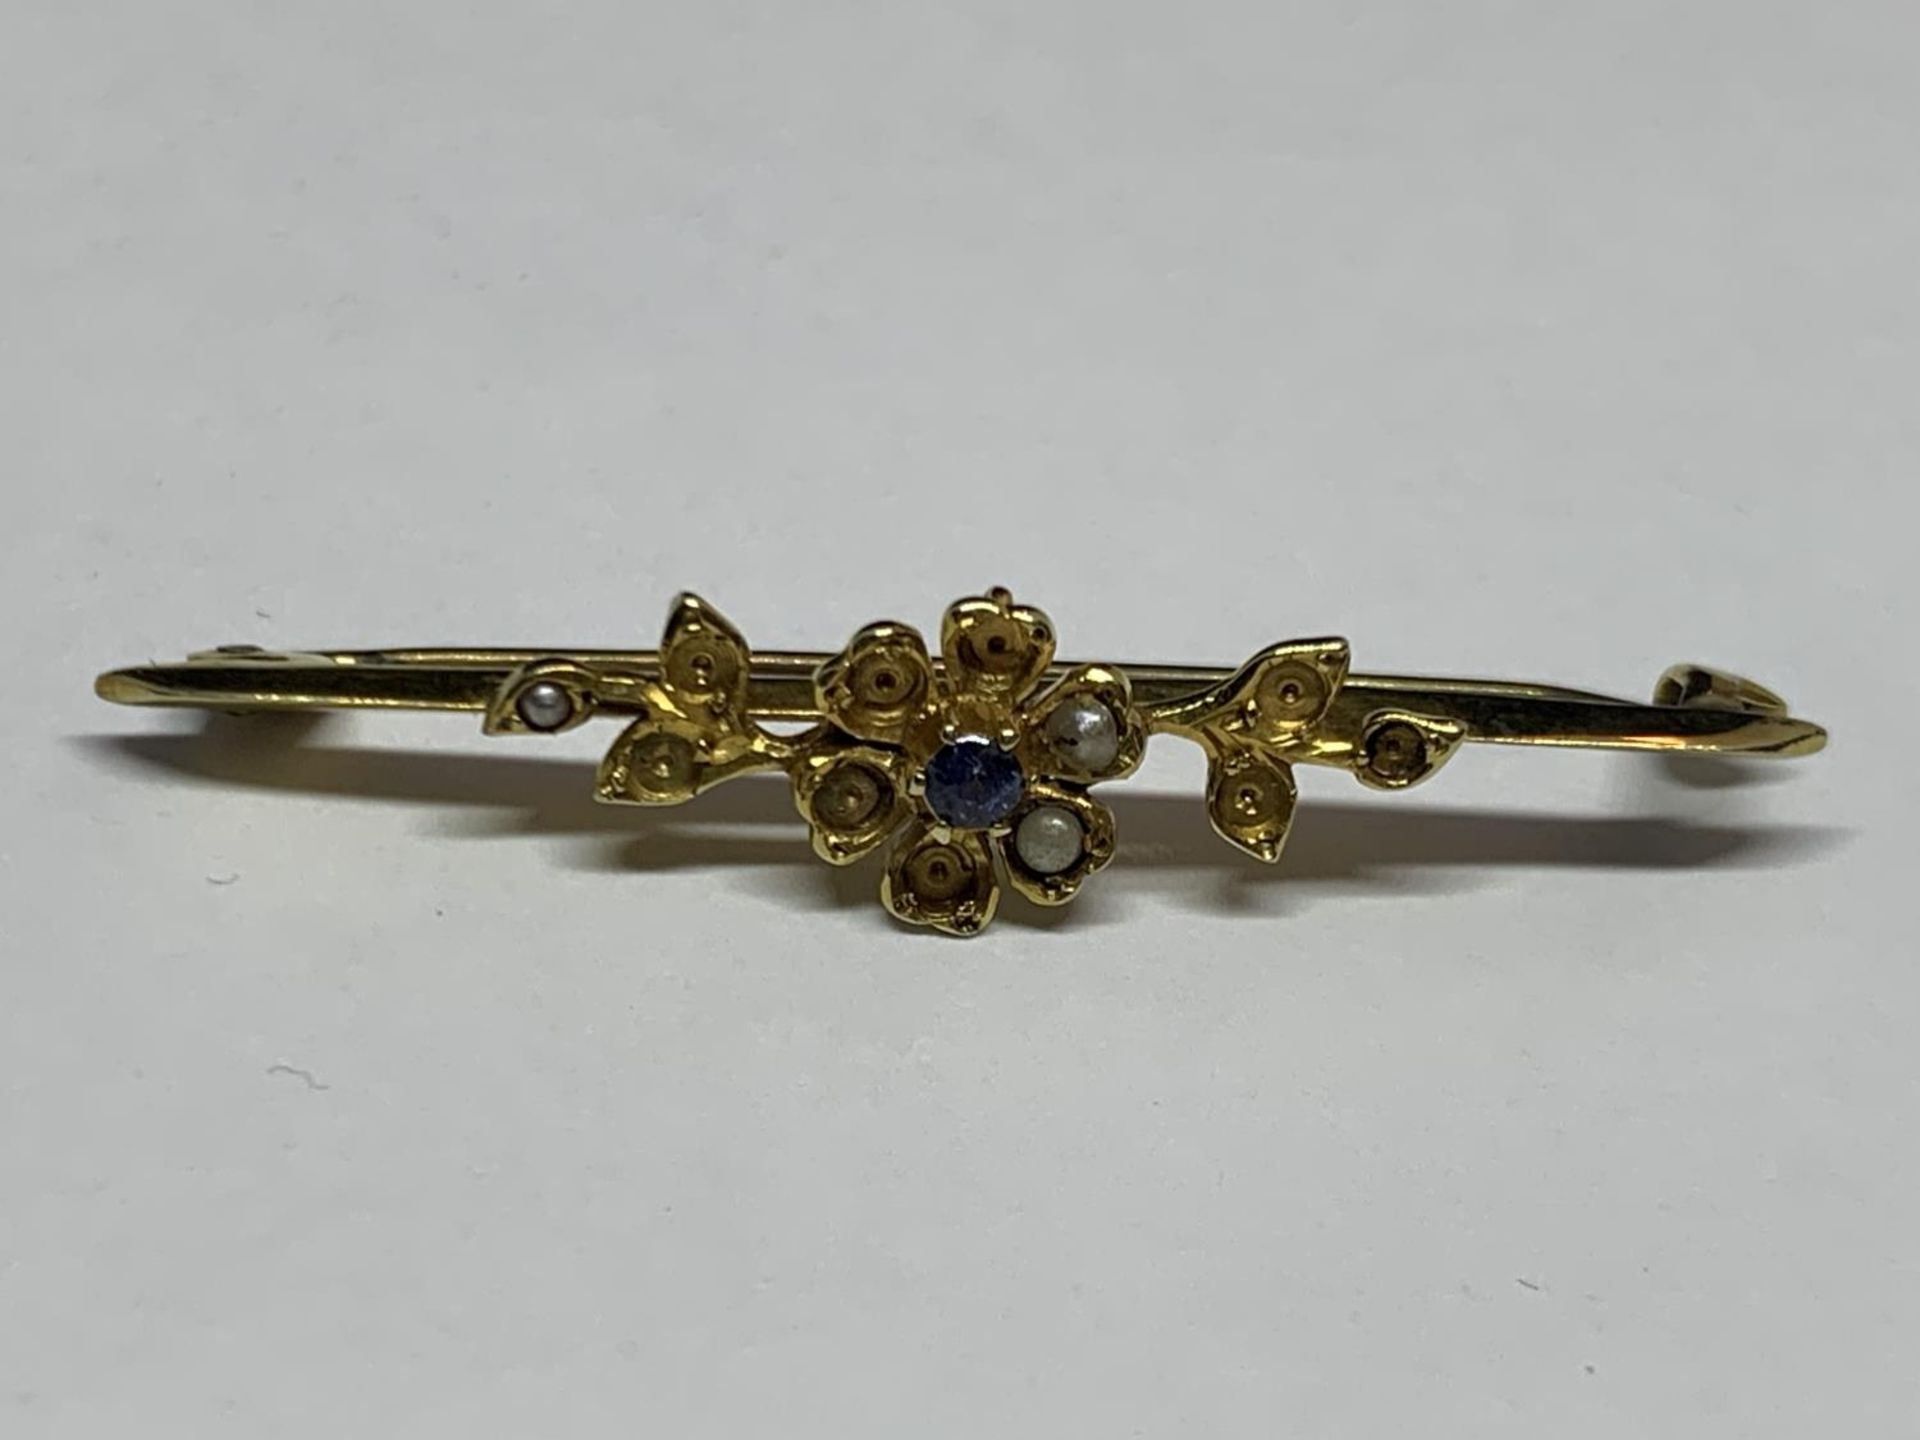 A 10CT YELLOW GOLD FLORAL SEED PEARL BROOCH (MISSING SOME PEARLS), WEIGHT 2.25G, BOXED